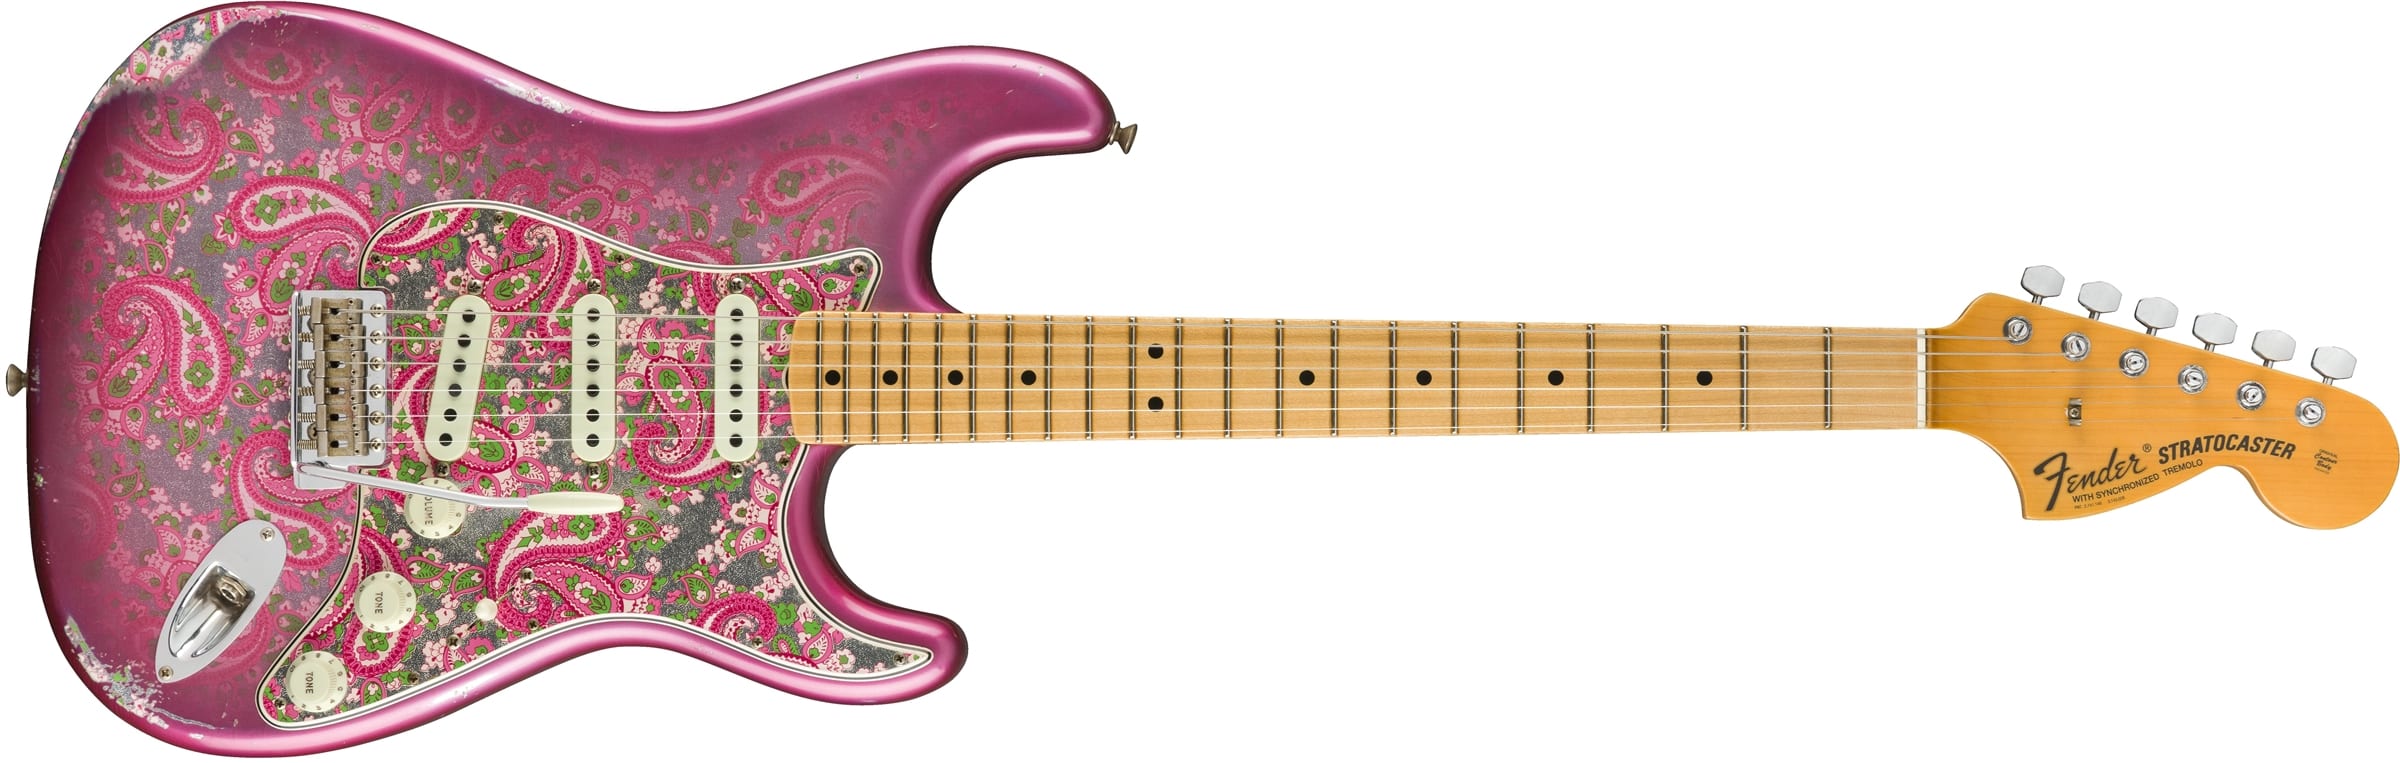 Fender Custom Shop 2018 Limited 1968 Pink Paisely Stratocaster